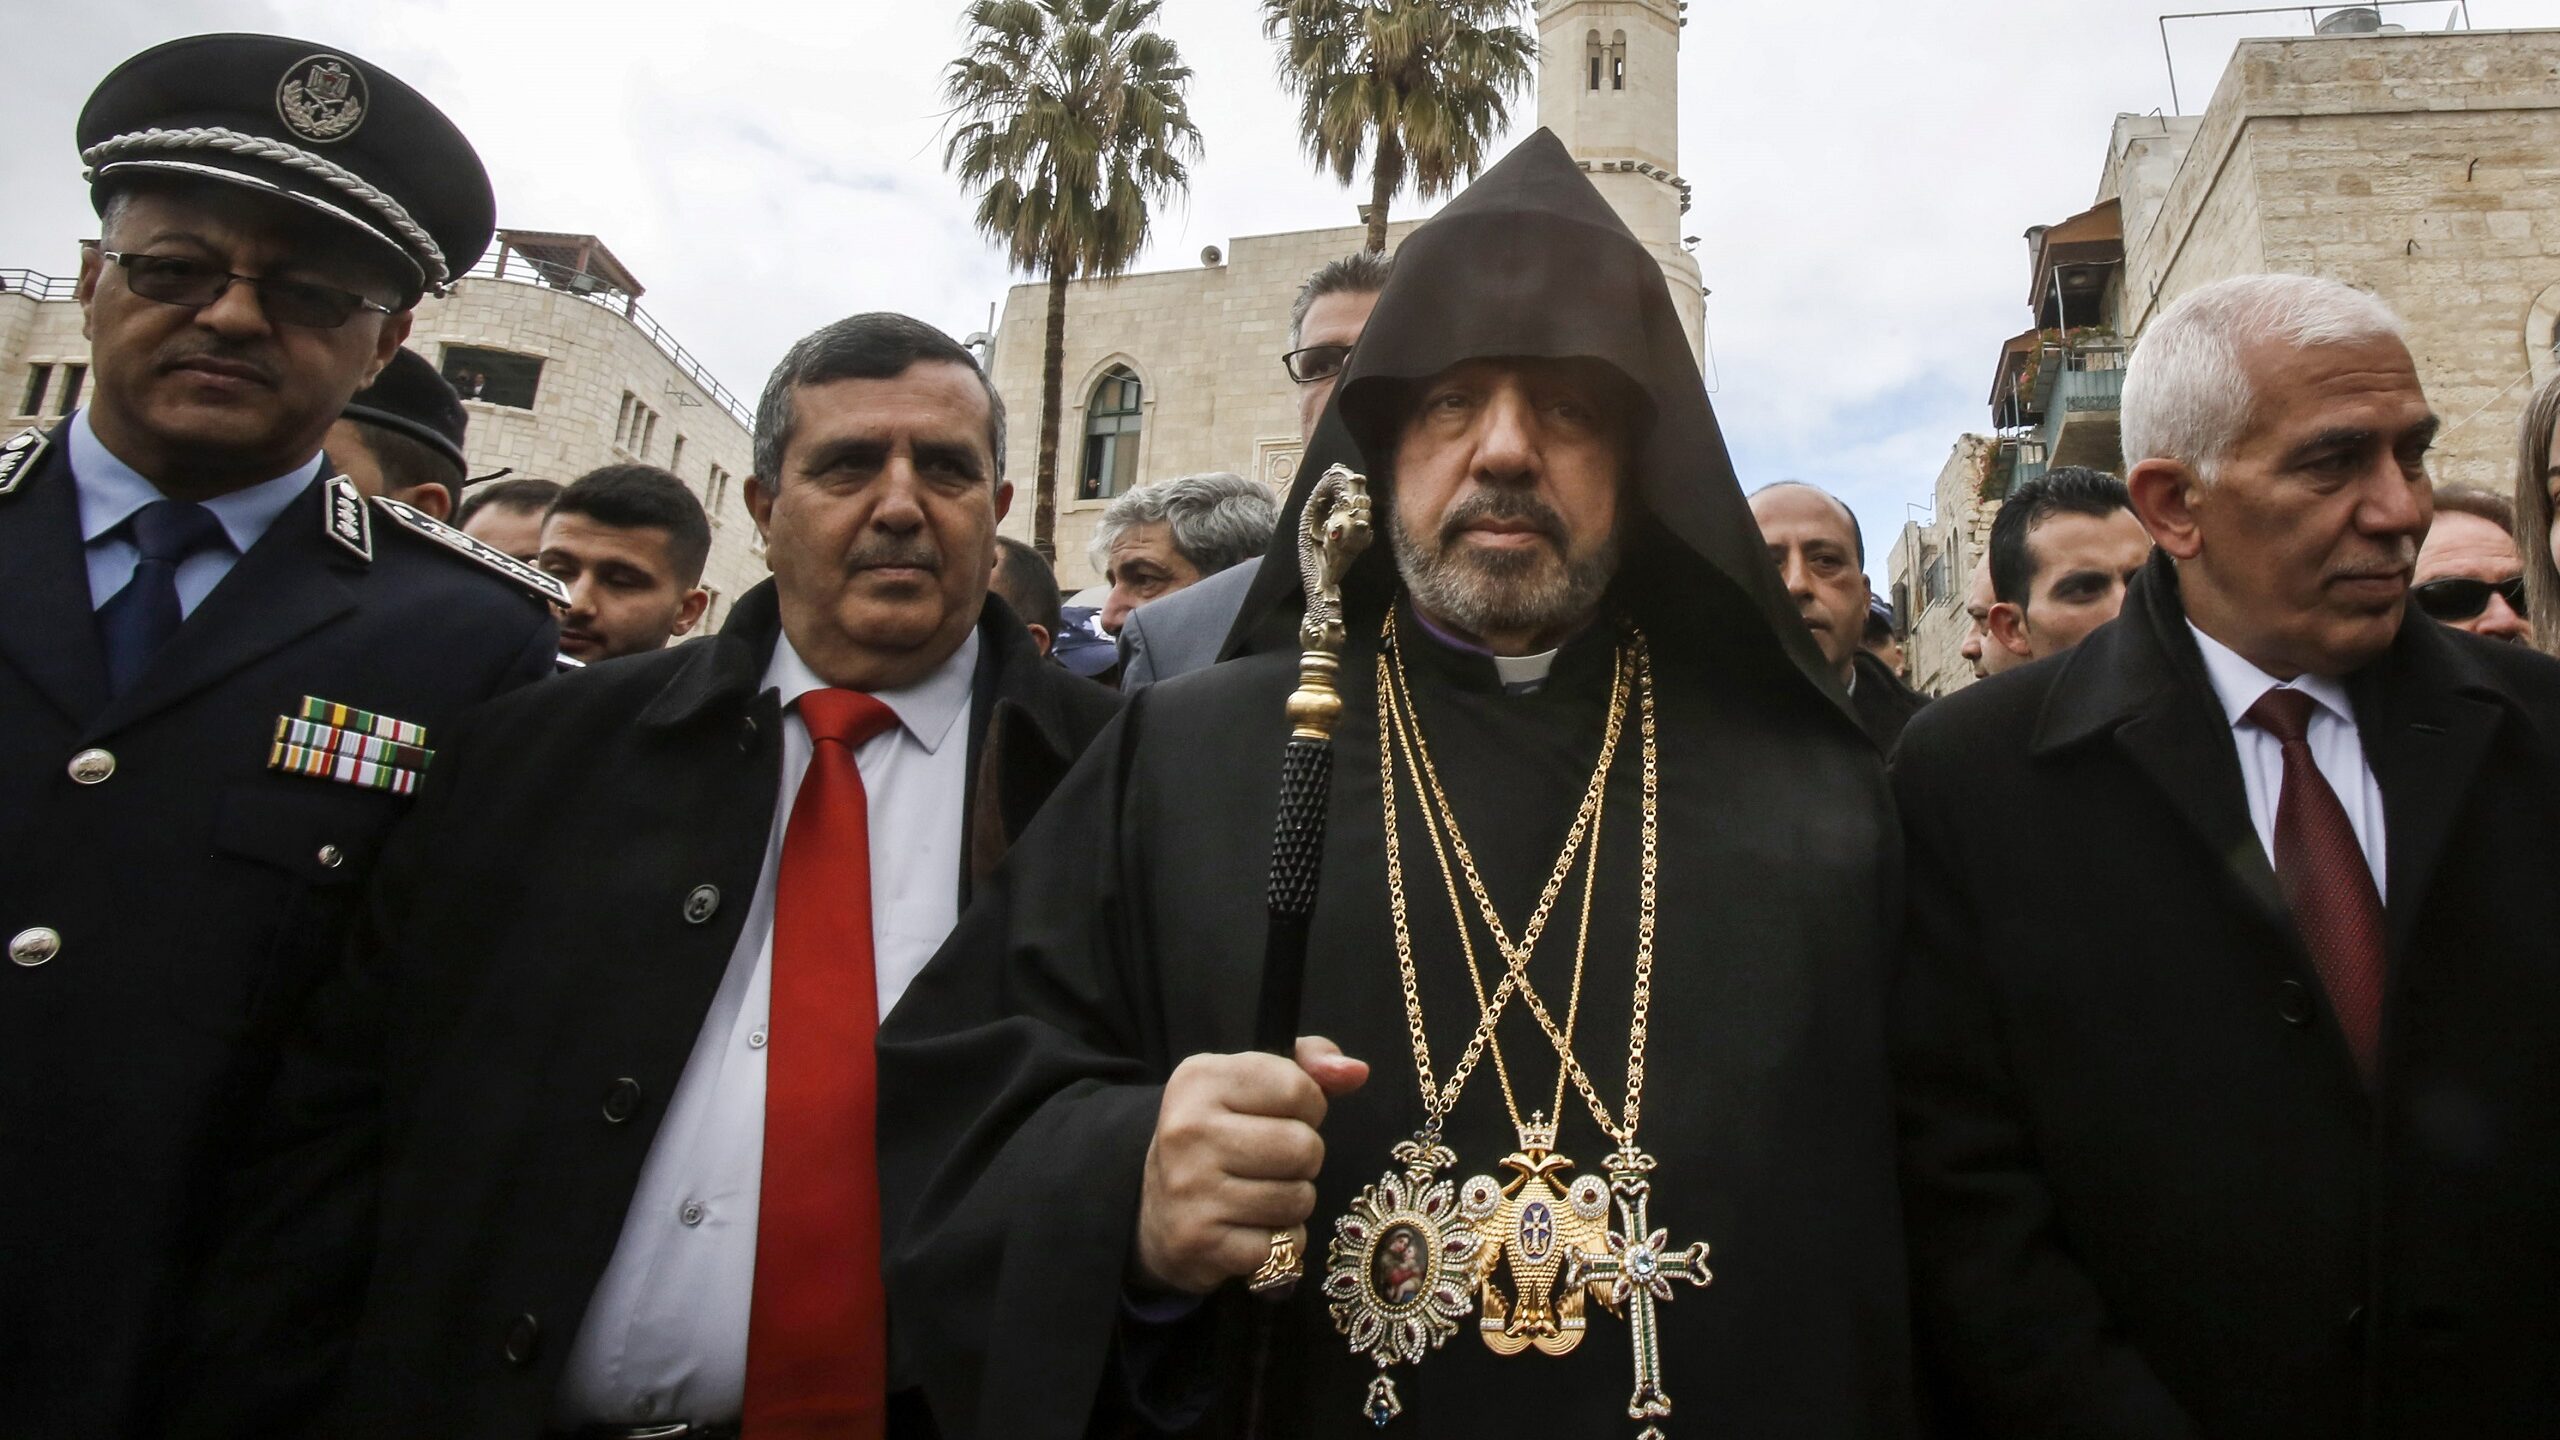 Exclusive: Priest Says He Became ‘Scapegoat’ for Controversial Armenian Land Deal